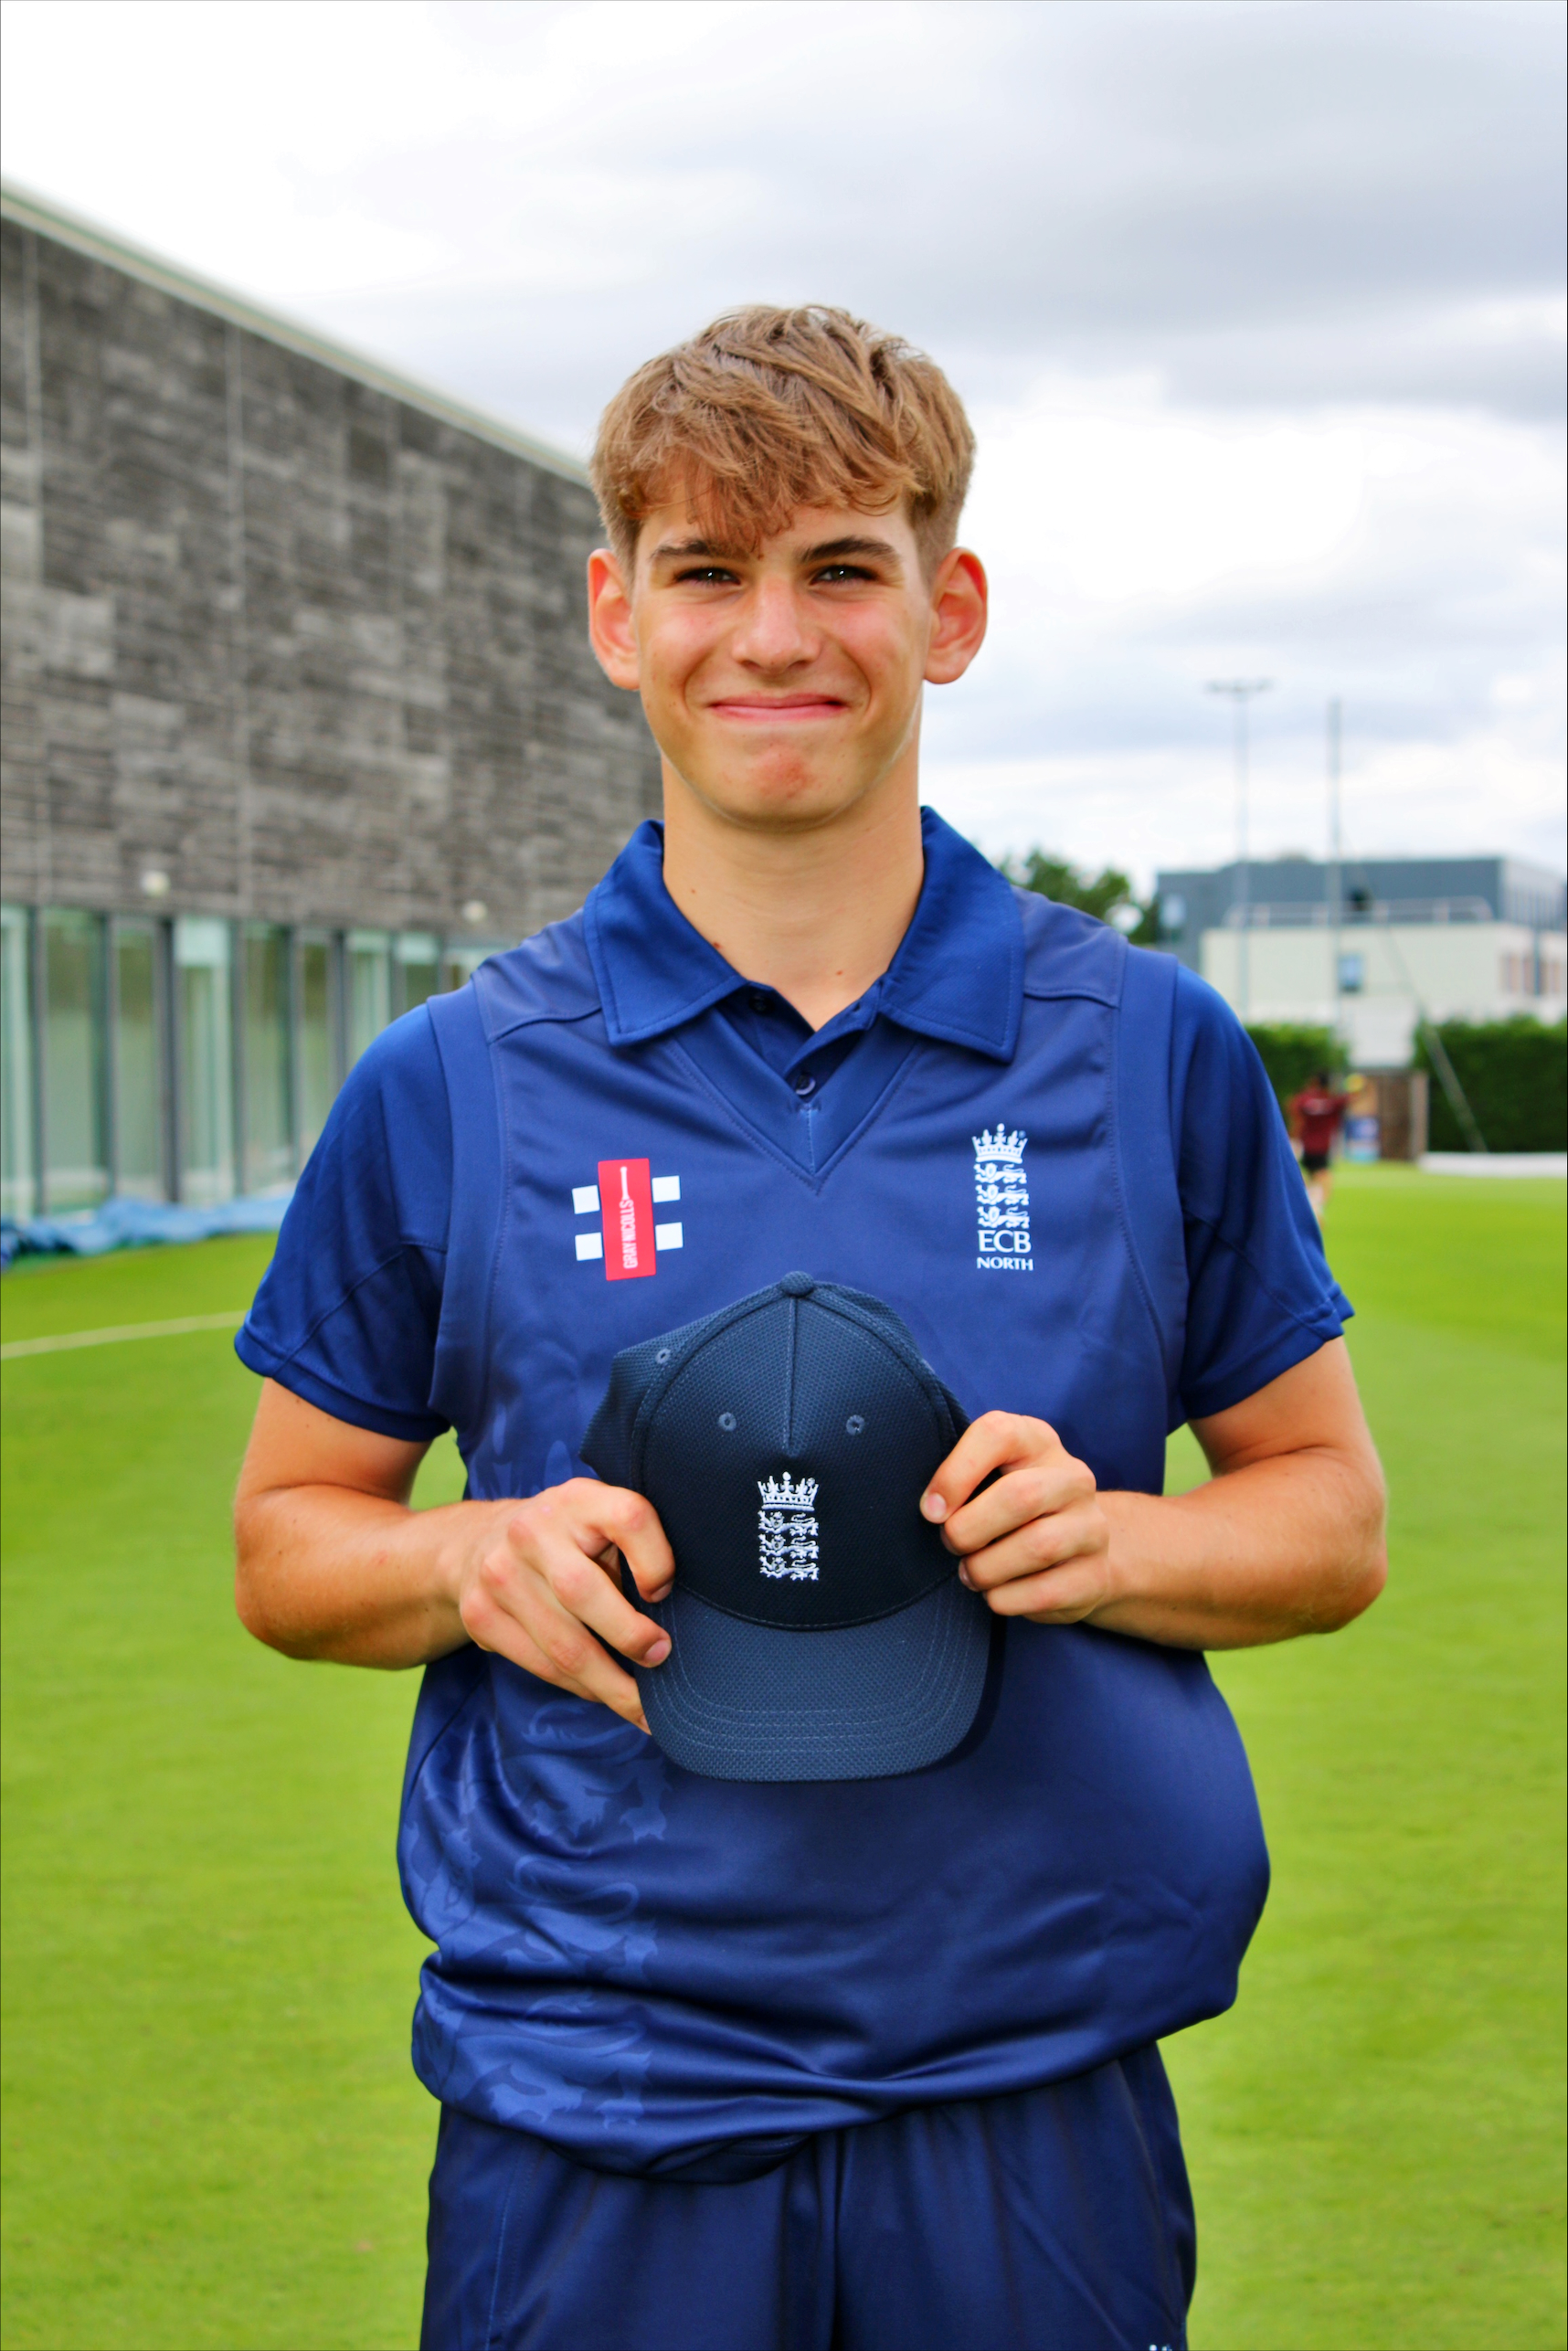 Wills is Schoolboys Cricketer of the Year!